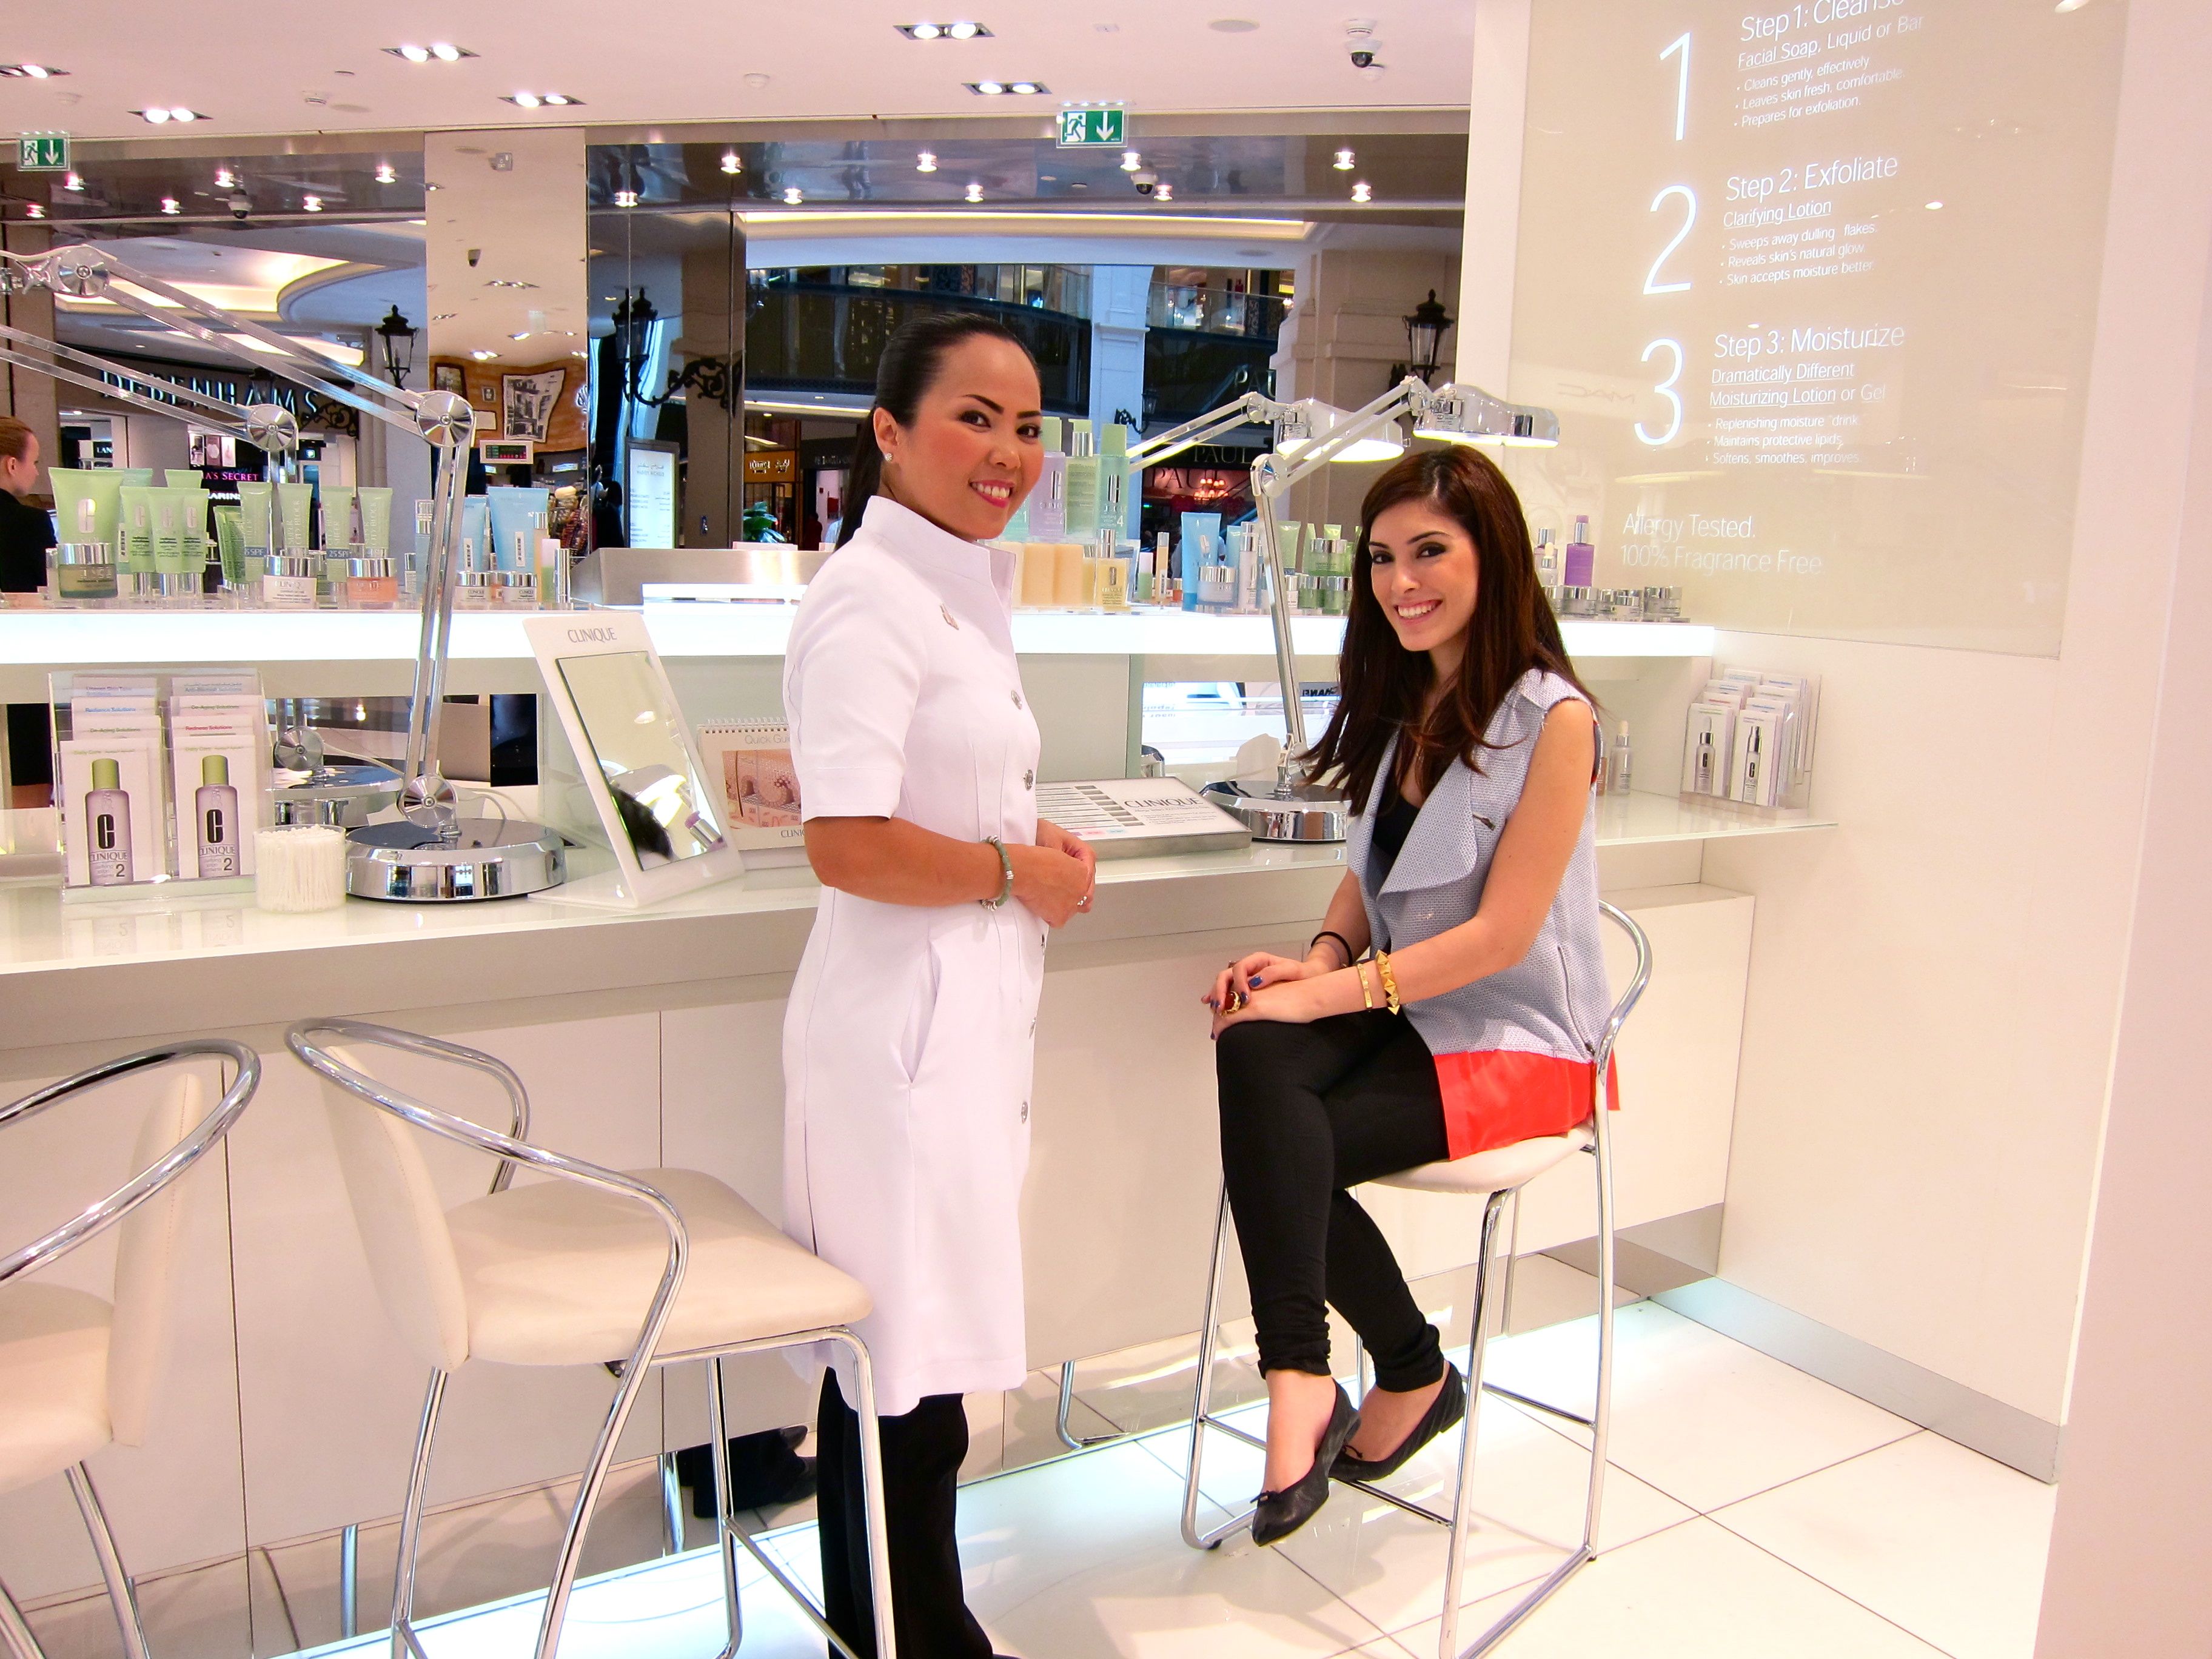 Myfashdiary visits... Clinique for a skin consultation!